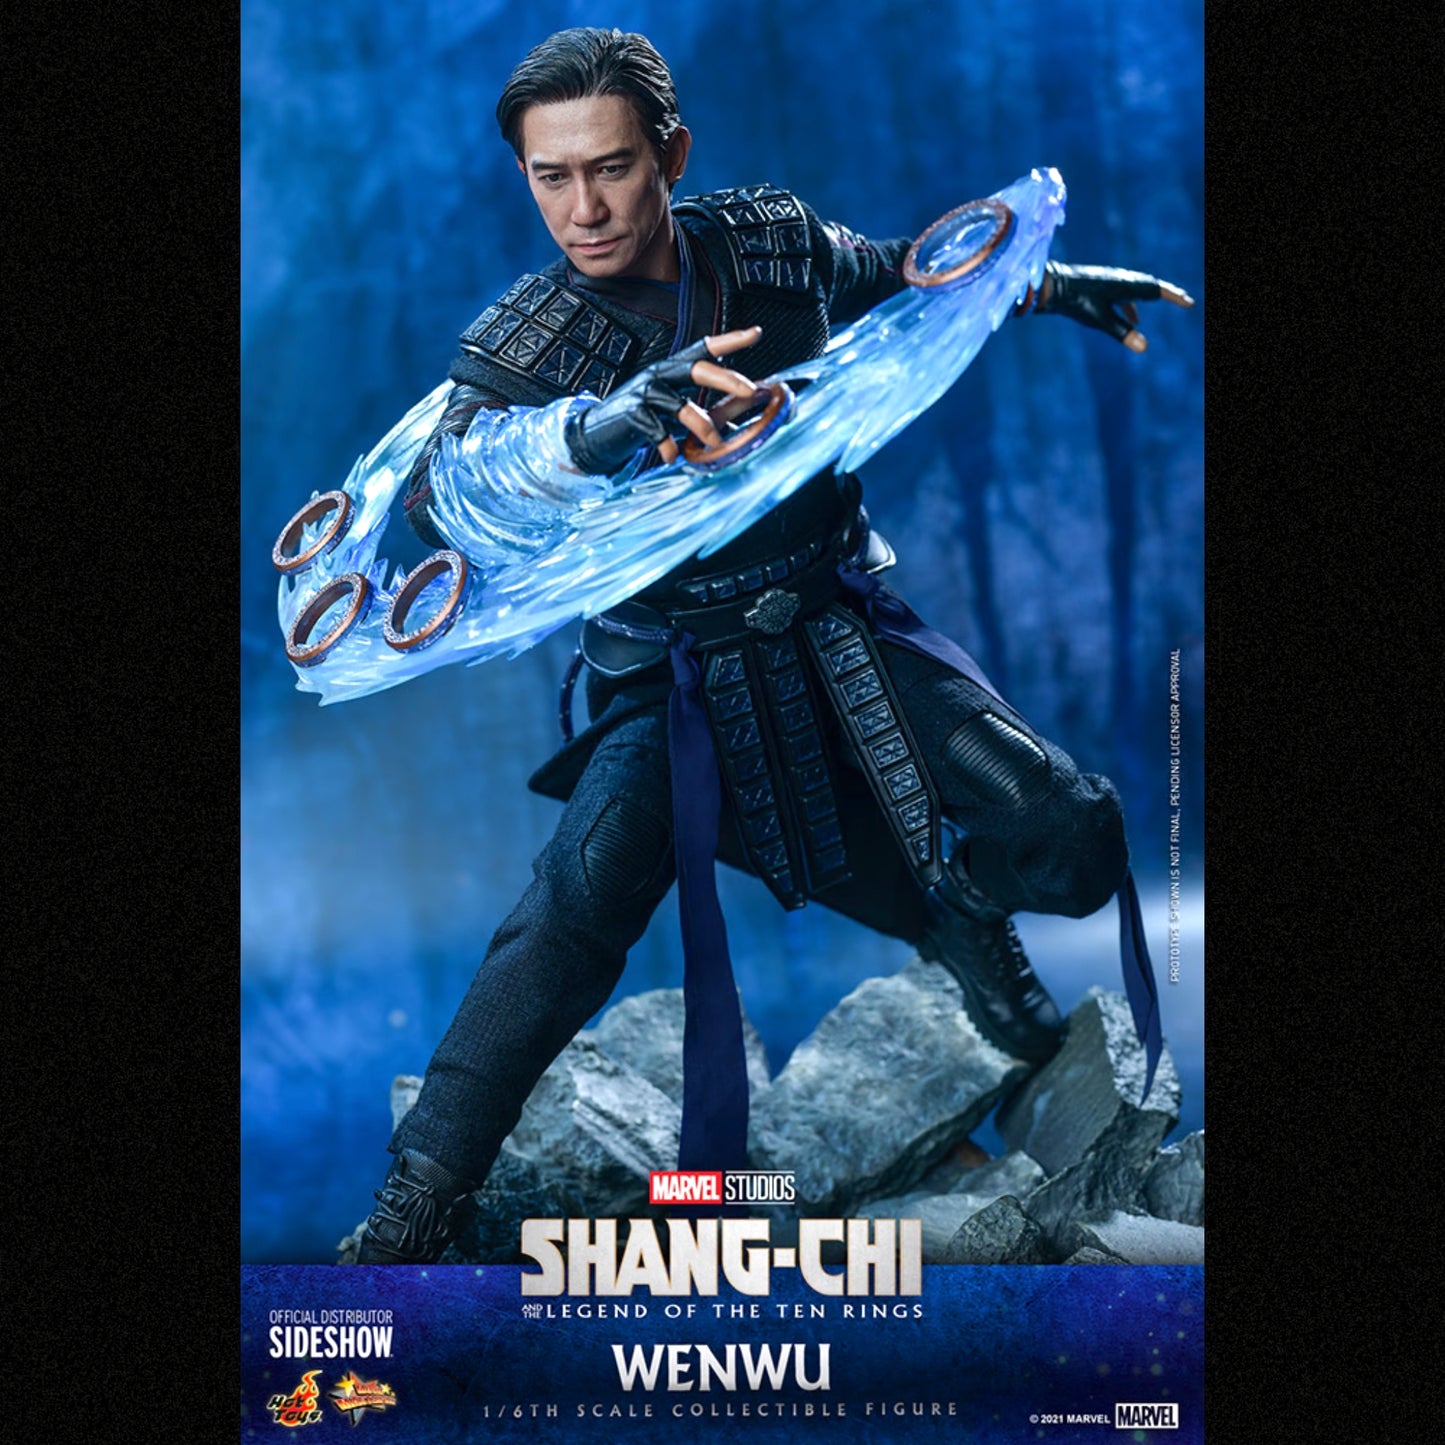 Wenwu (Shang-Chi Legend of the Ten Rings) Marvel 1:6 Scale Figure by Hot Toys